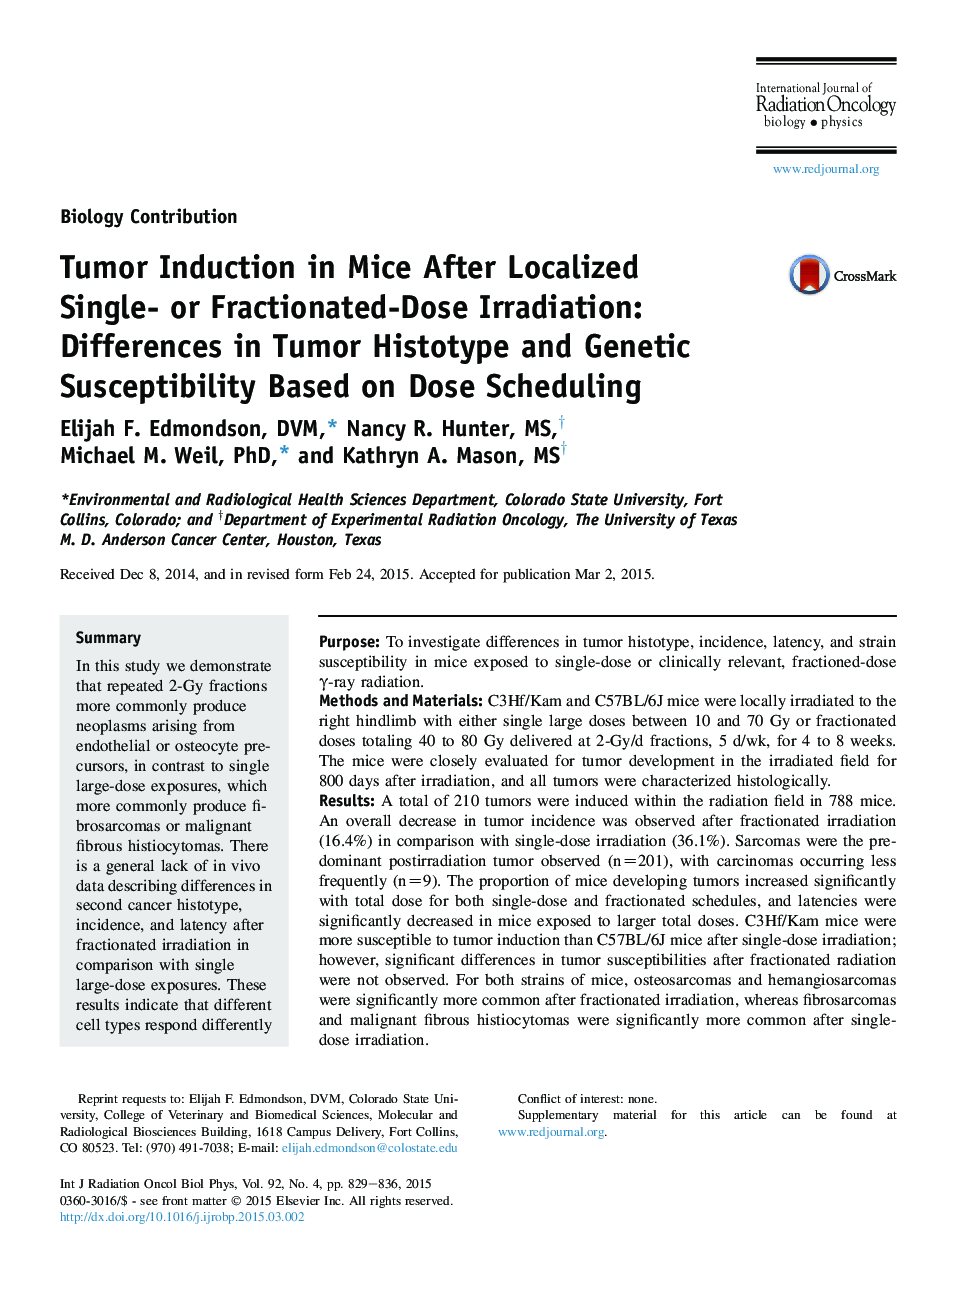 Tumor Induction in Mice After Localized Single- or Fractionated-Dose Irradiation: Differences in Tumor Histotype and Genetic Susceptibility Based on Dose Scheduling